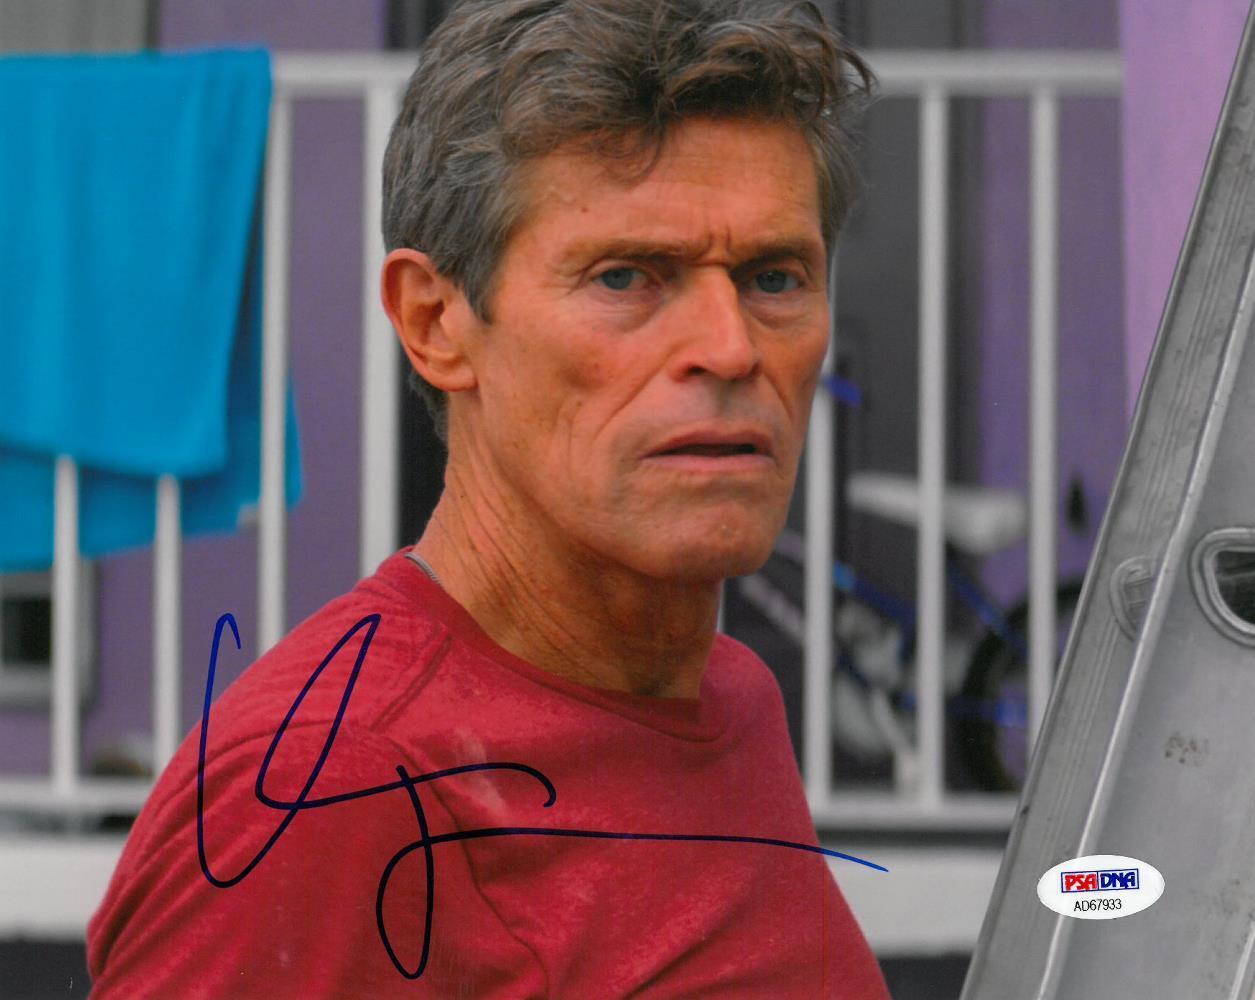 Willem Dafoe Signed The Florida Project Autographed 8x10 Photo Poster painting PSA/DNA #AD67933